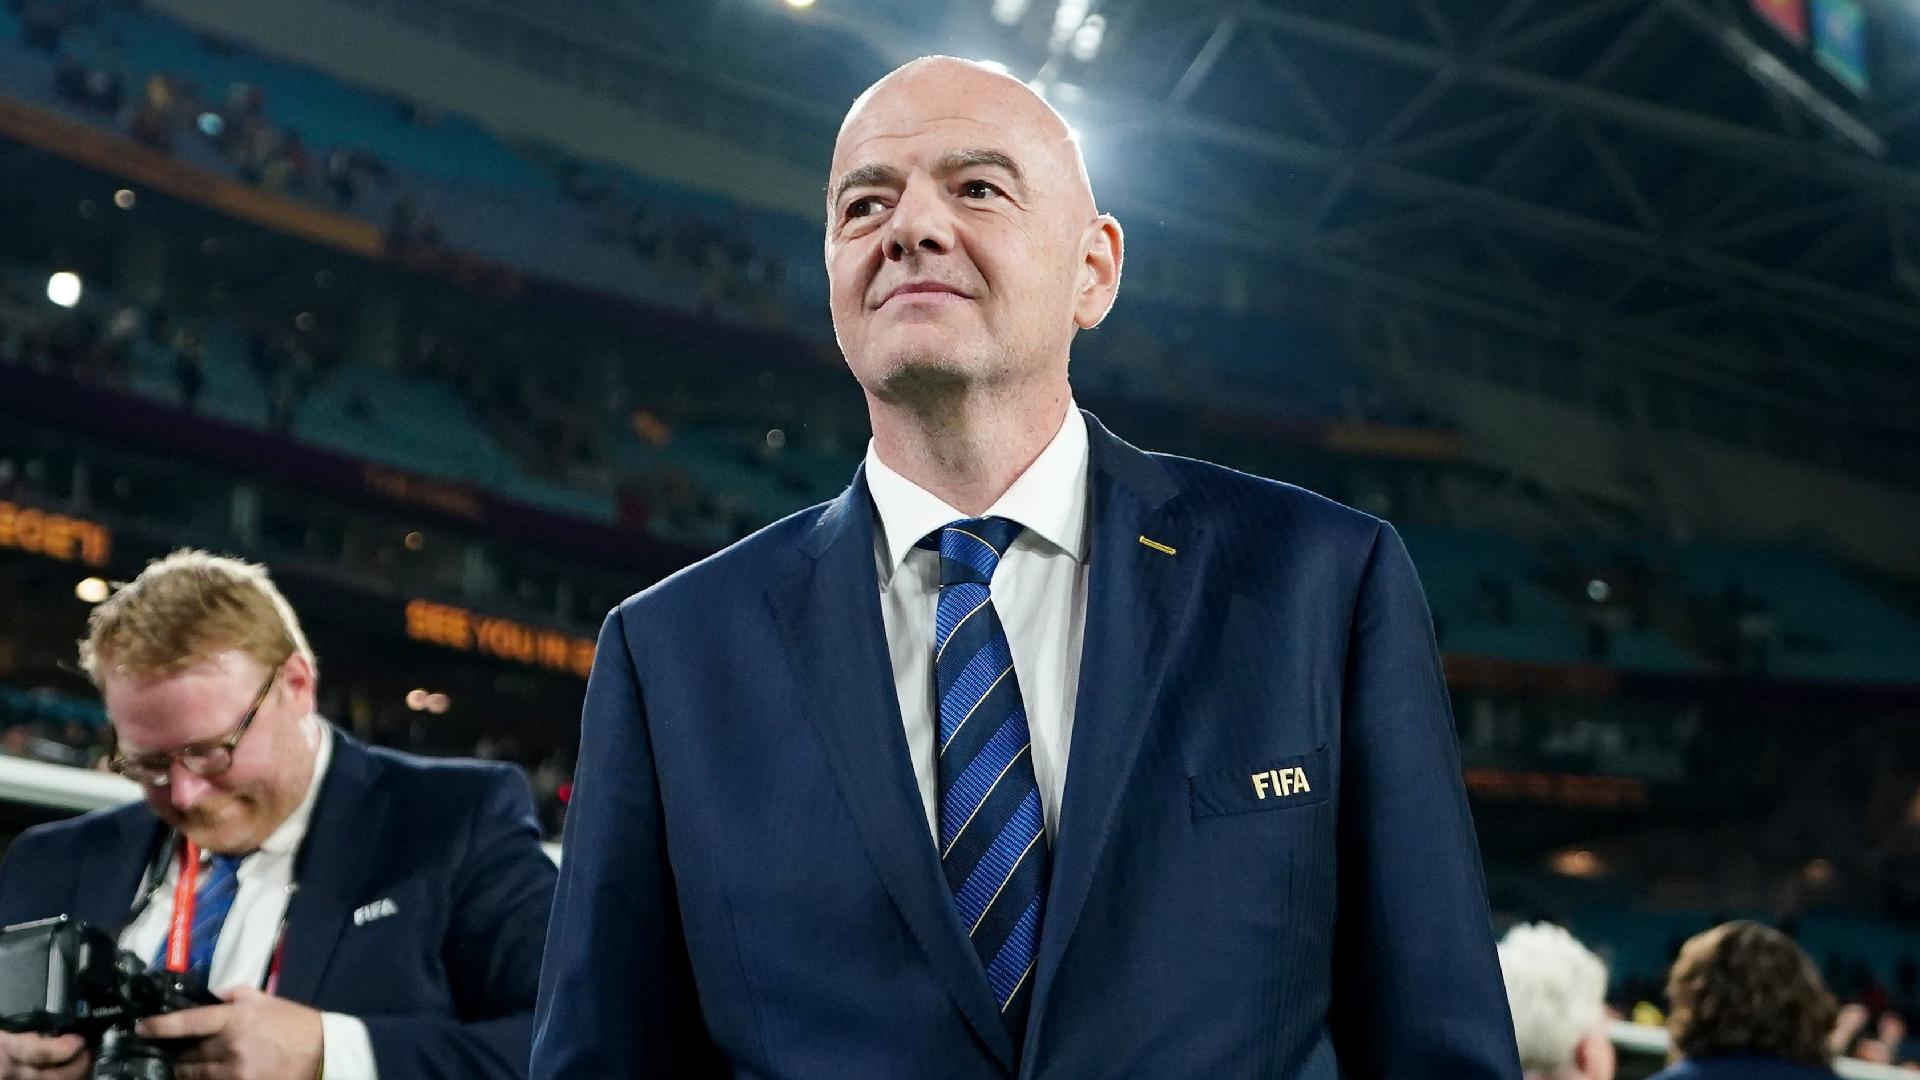 FIFA president Gianni Infantino shows the red card to blue cards